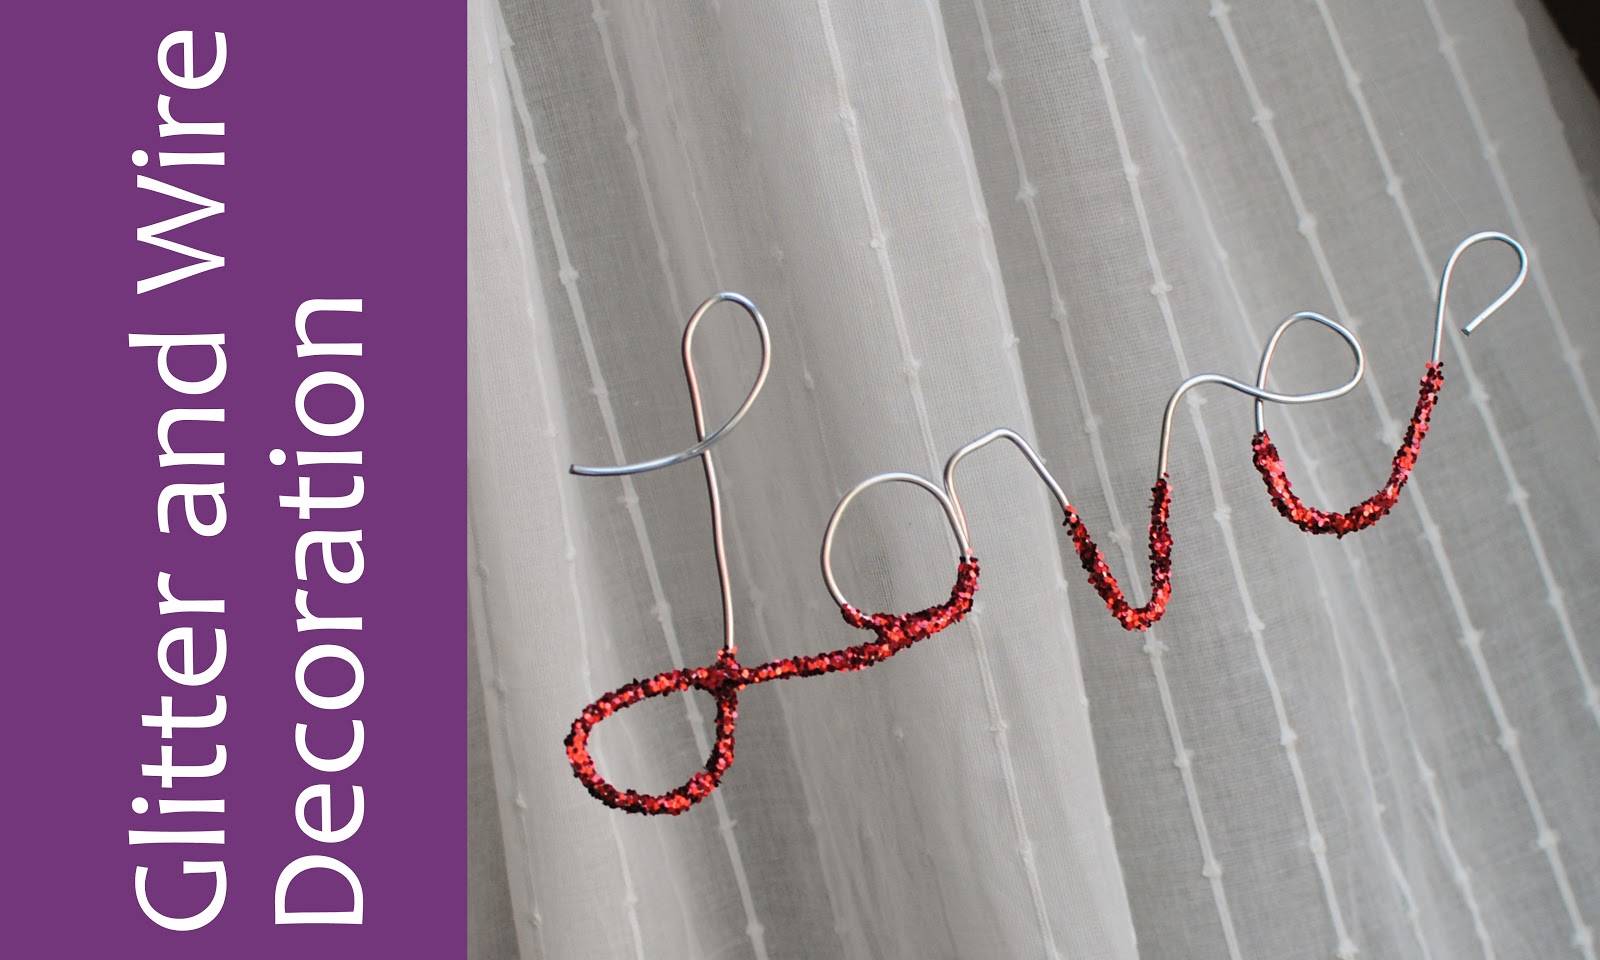 Big City Little Joys: Glitter and Wire Decoration (LOVE)